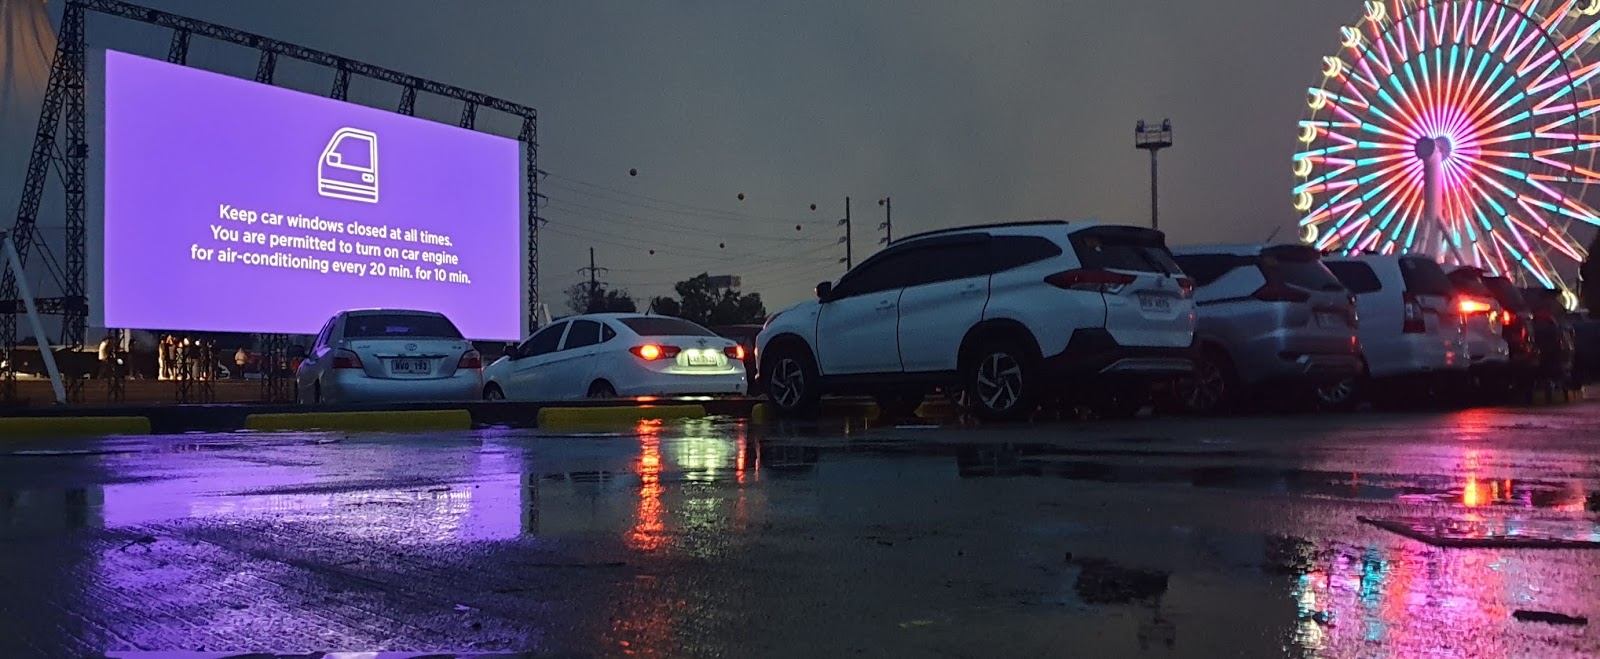 The Country's First Modern-Day Drive-In Cinema Now Open at SM City Pampanga